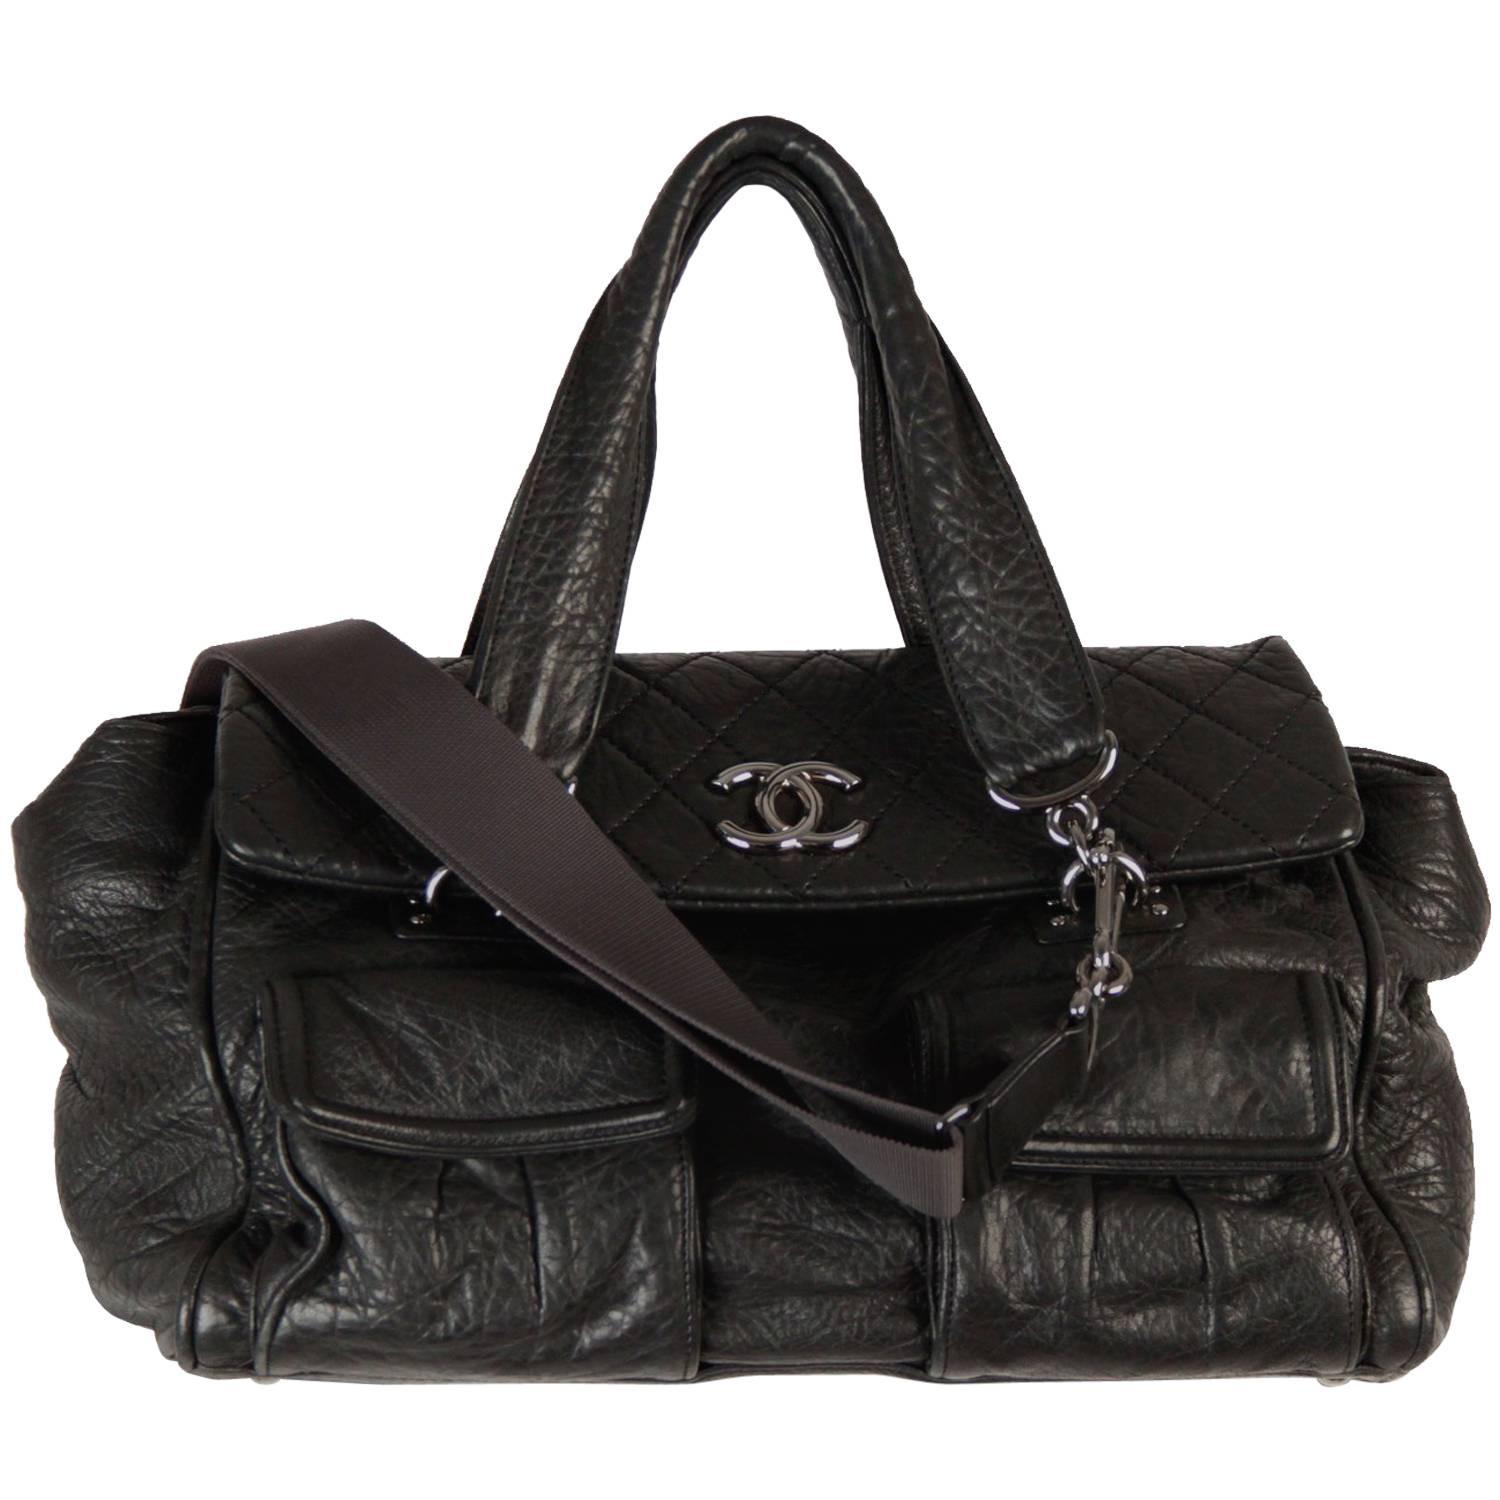 CHANEL Black Distressed Leather TOTE Satchel w/ QUILTED Flap